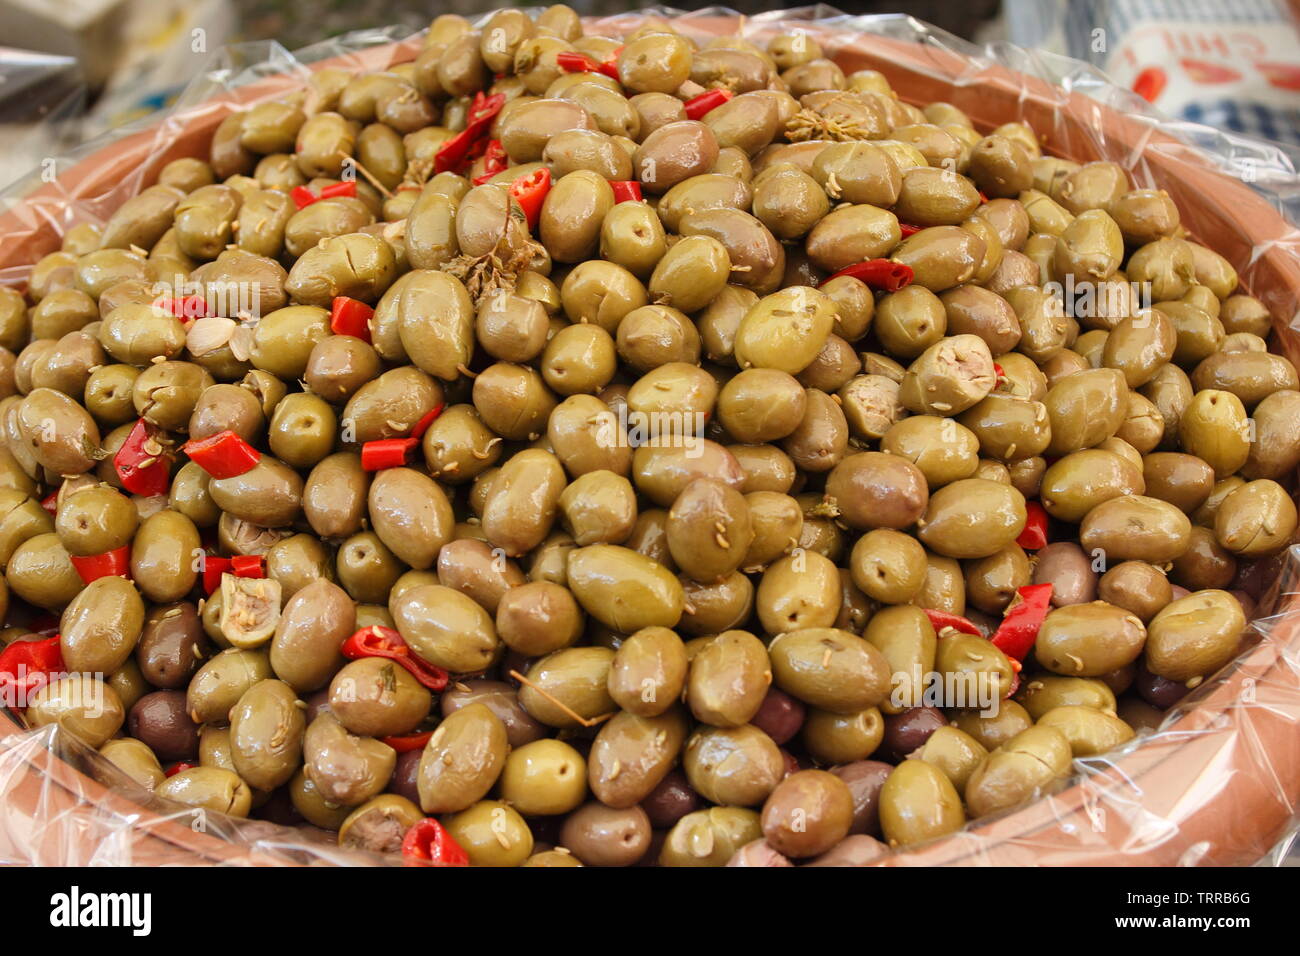 Italy Piedmont lakes area Orta San Giulio Lago d' Giulio Italian Alps green olives peppers and olives for sale in Wednesday market Stock Photo